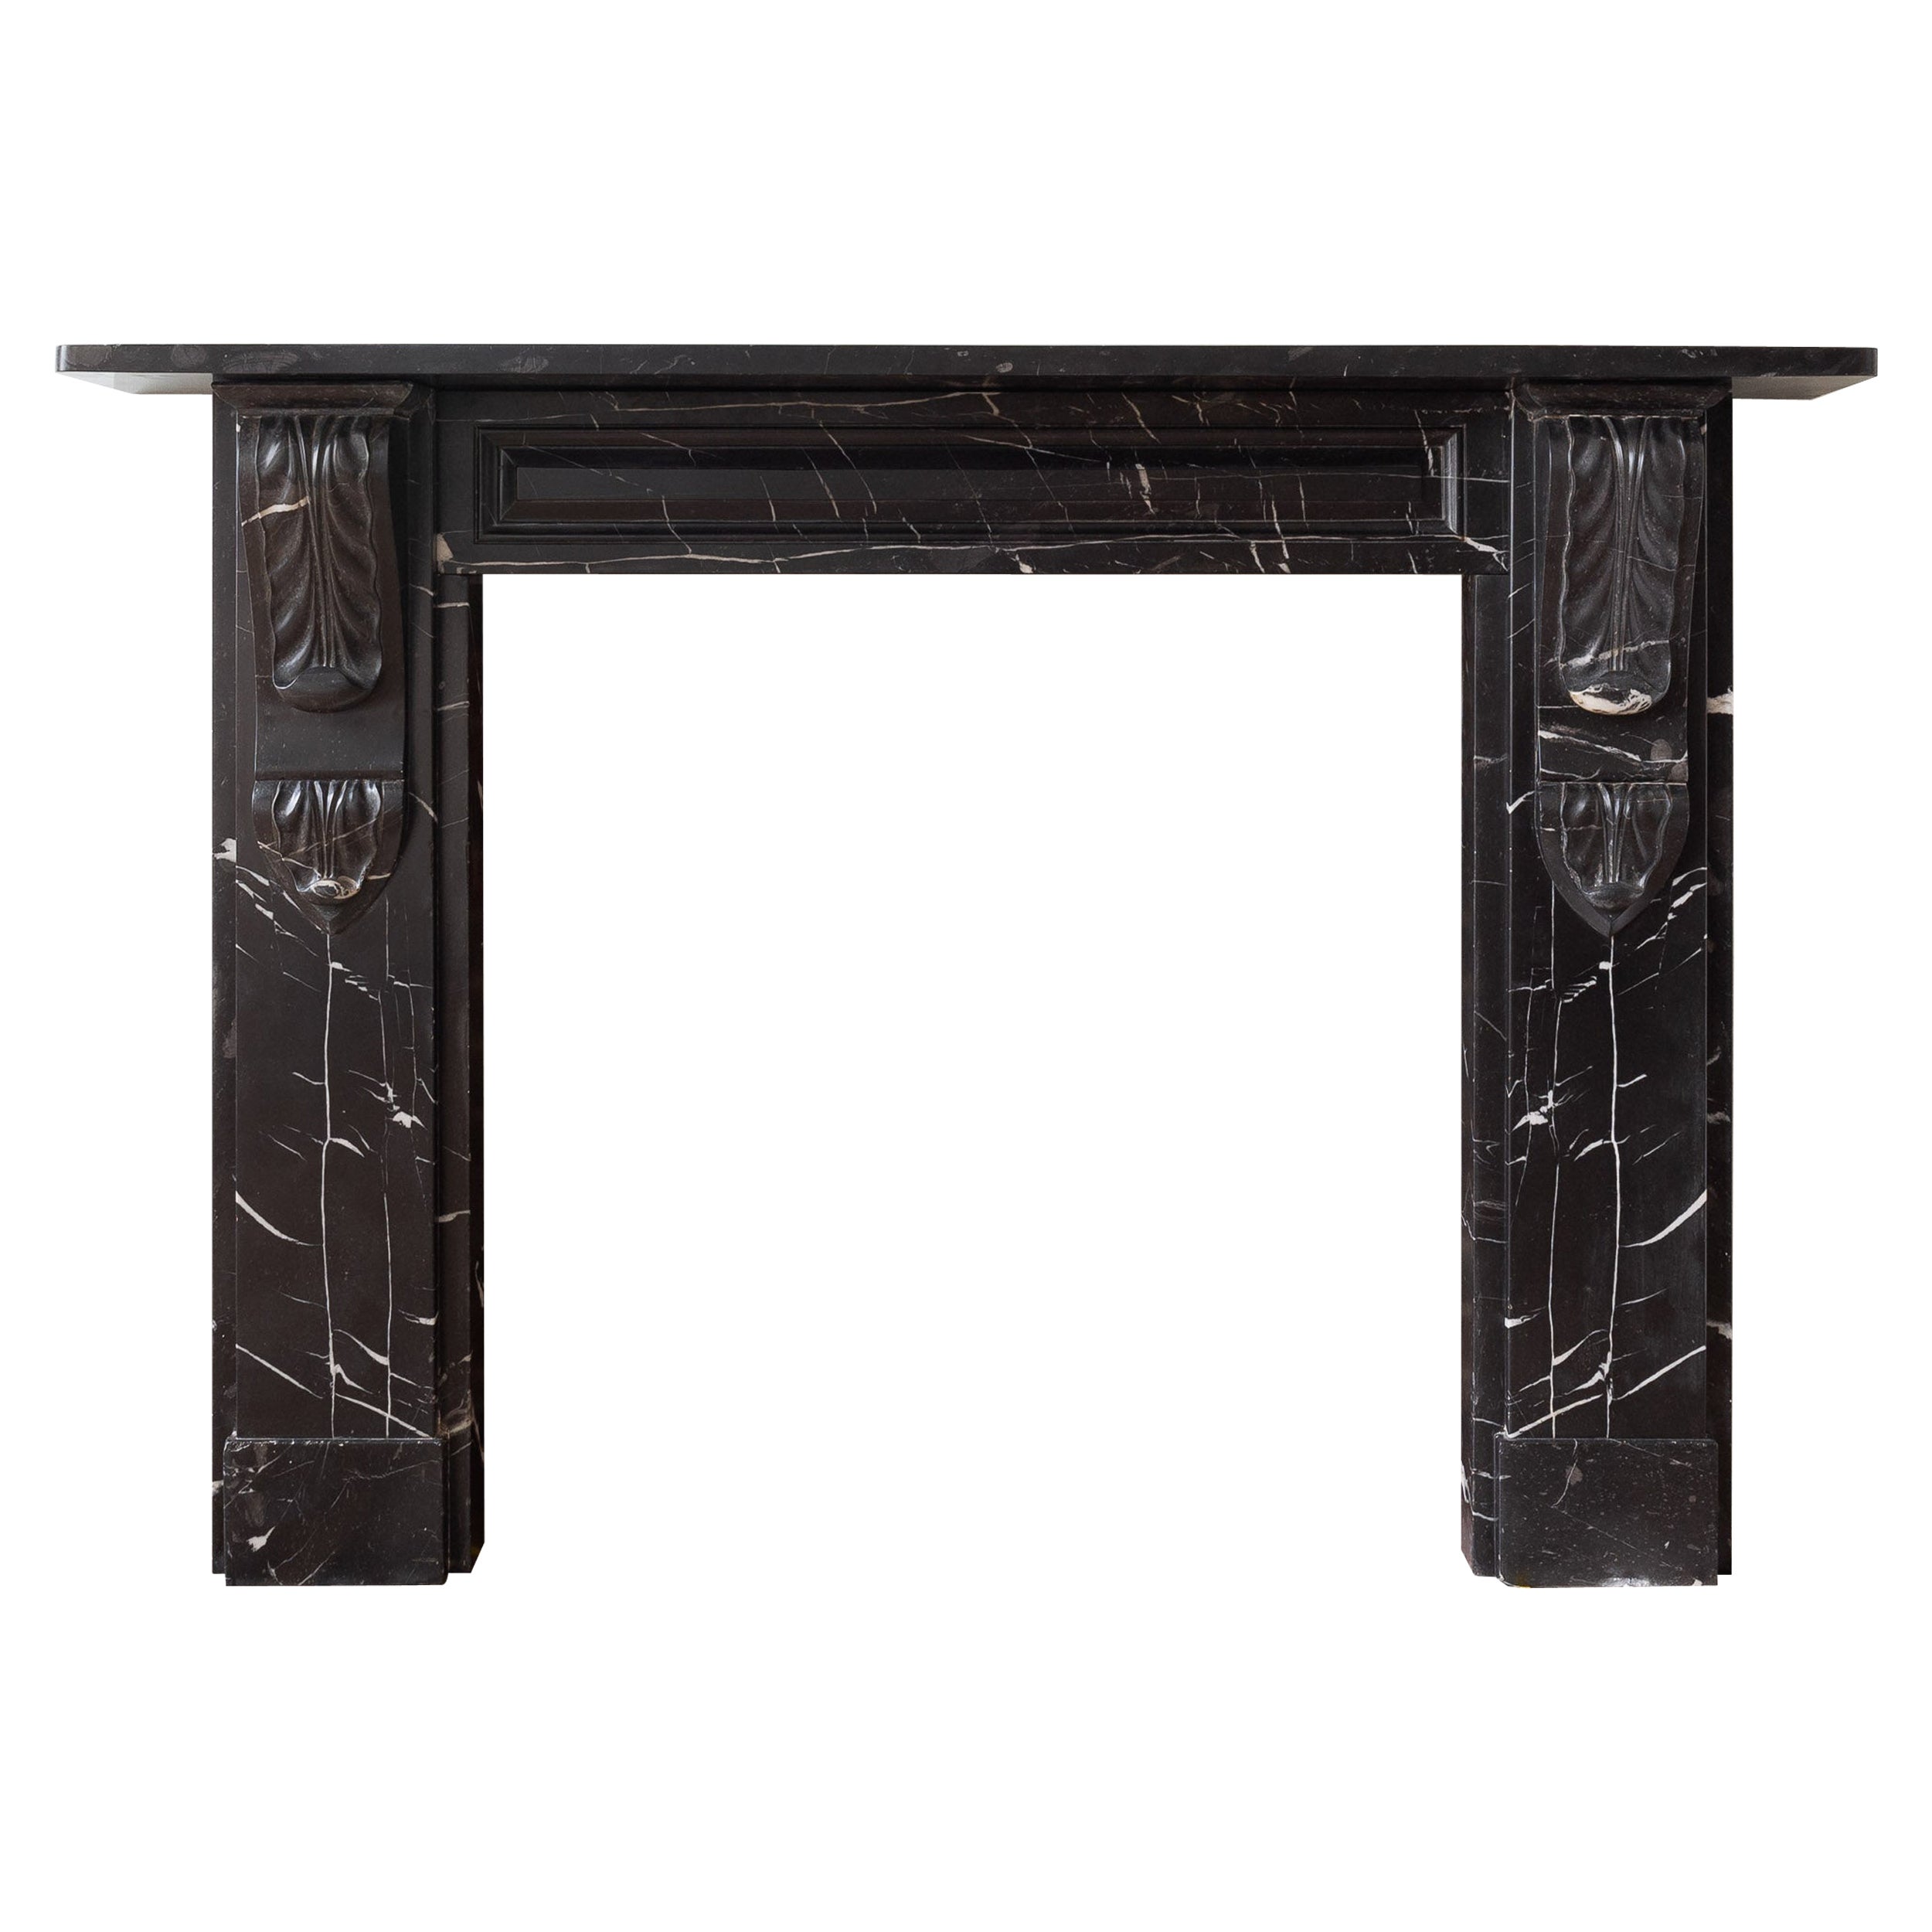 Early Victorian Radford Black Fireplace  For Sale